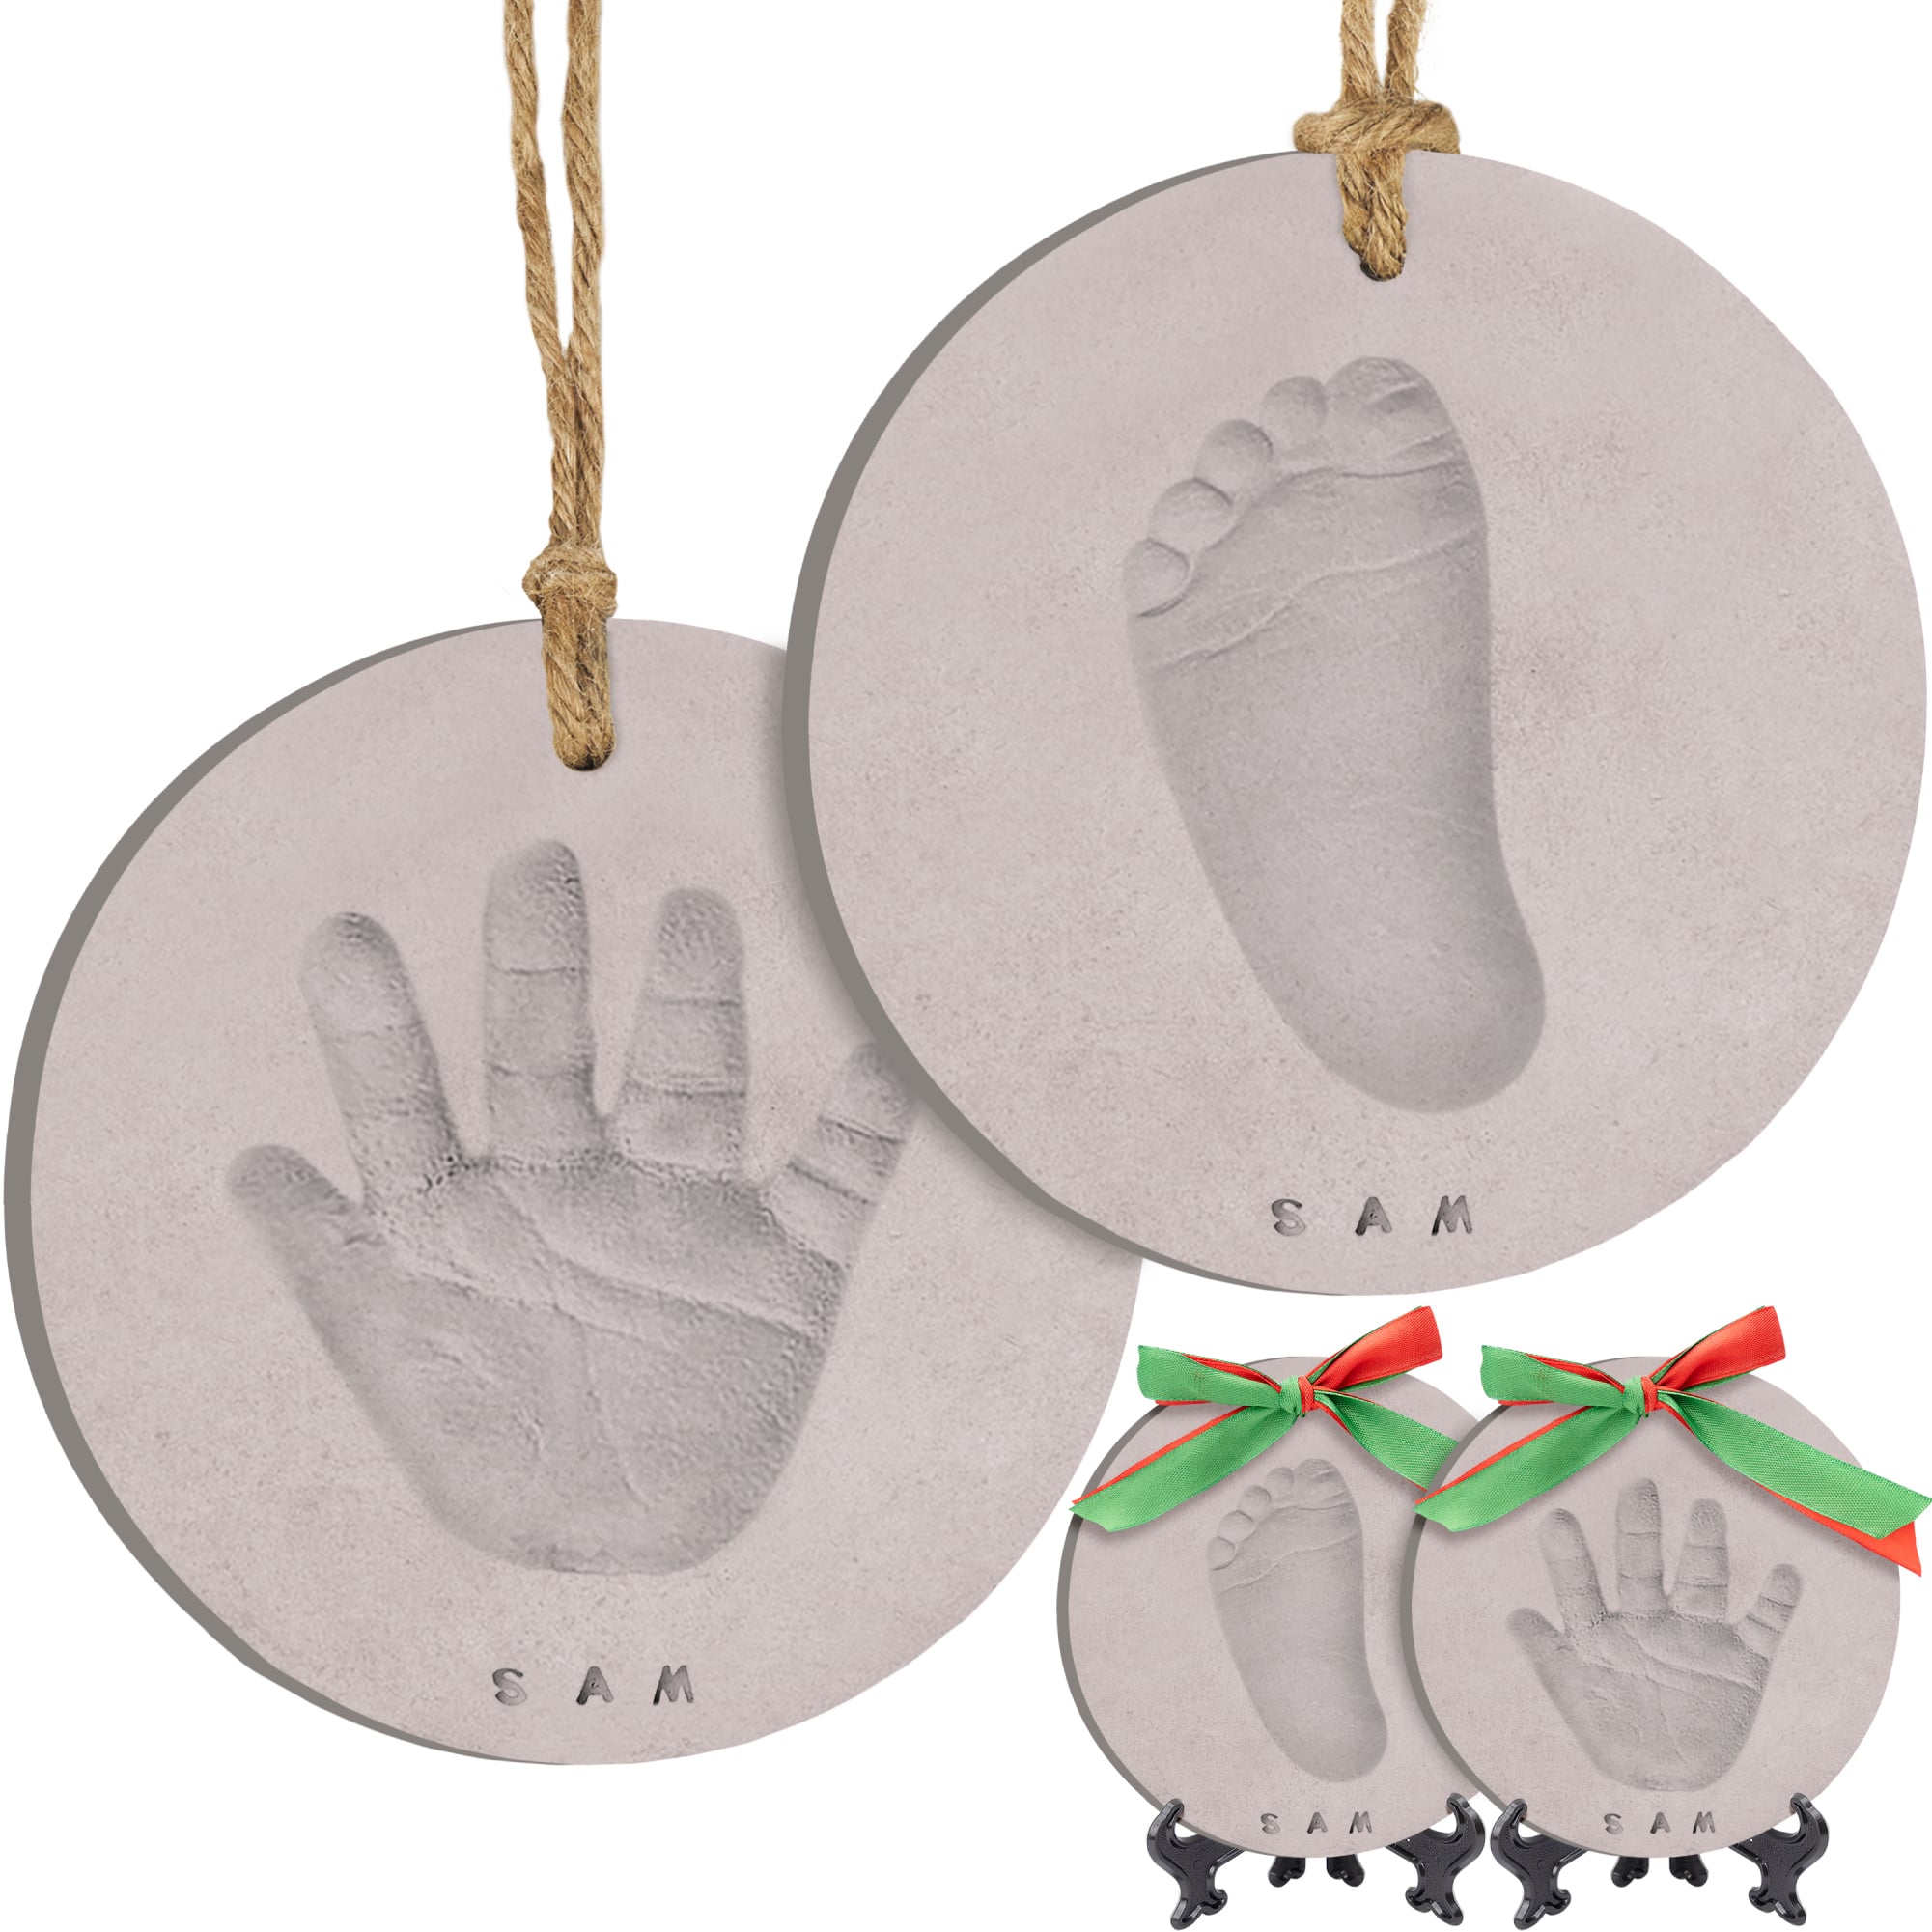  KeaBabies Baby Hand and Footprint Kit and Inkless Hand